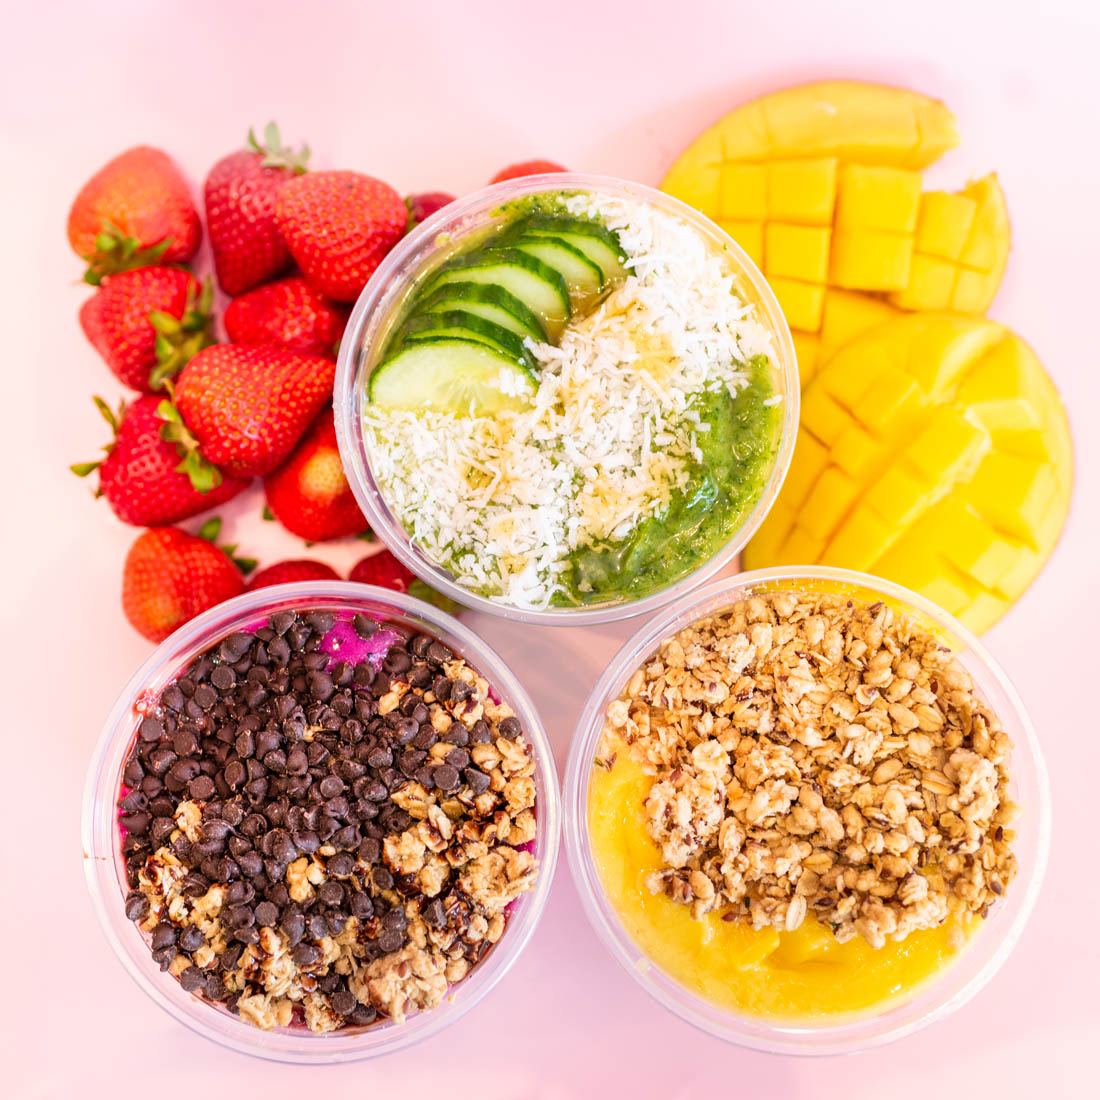 Rush Bowls smoothie bowls nutrition info in Berkeley, CA.